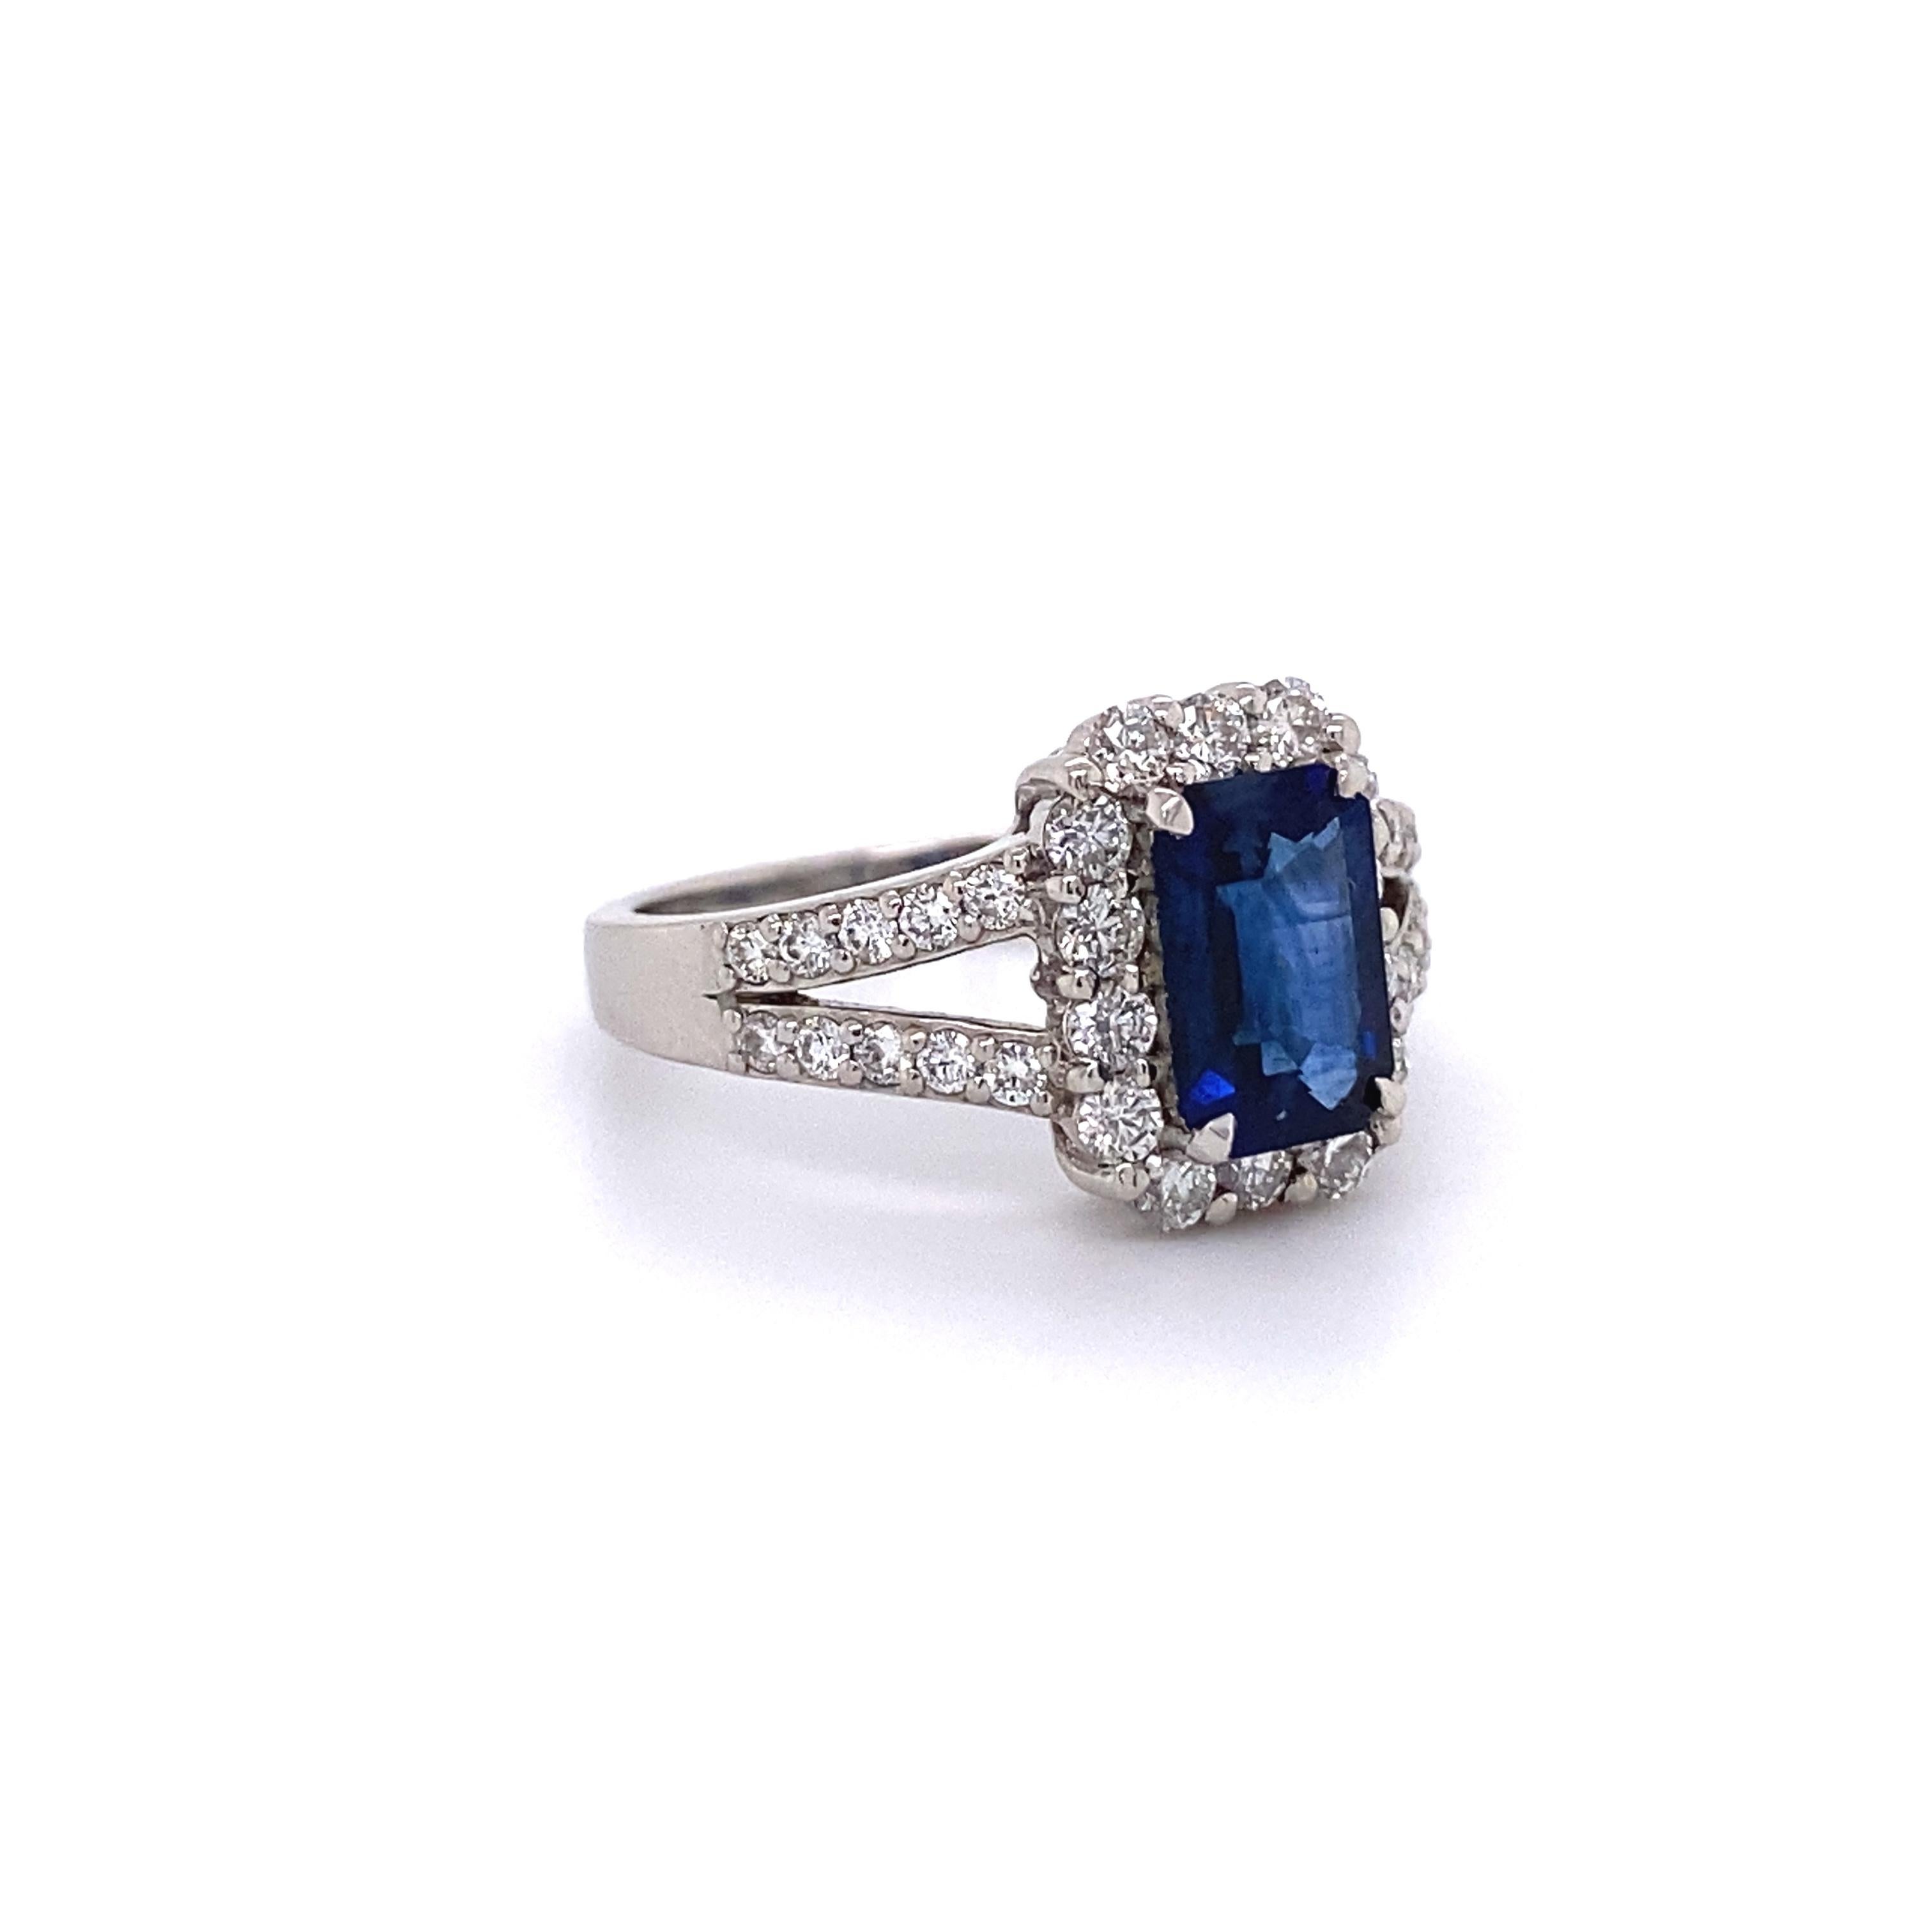 Beautiful finely detailed Emerald-cut Sapphire and Diamond Platinum Cocktail Ring. Center securely set with an Emerald cut Blue 1.47 Carat Sapphire surrounded by and accented on V-shaped shank with Diamonds approx. 0.72tctw. Dimensions: 0.77”w x